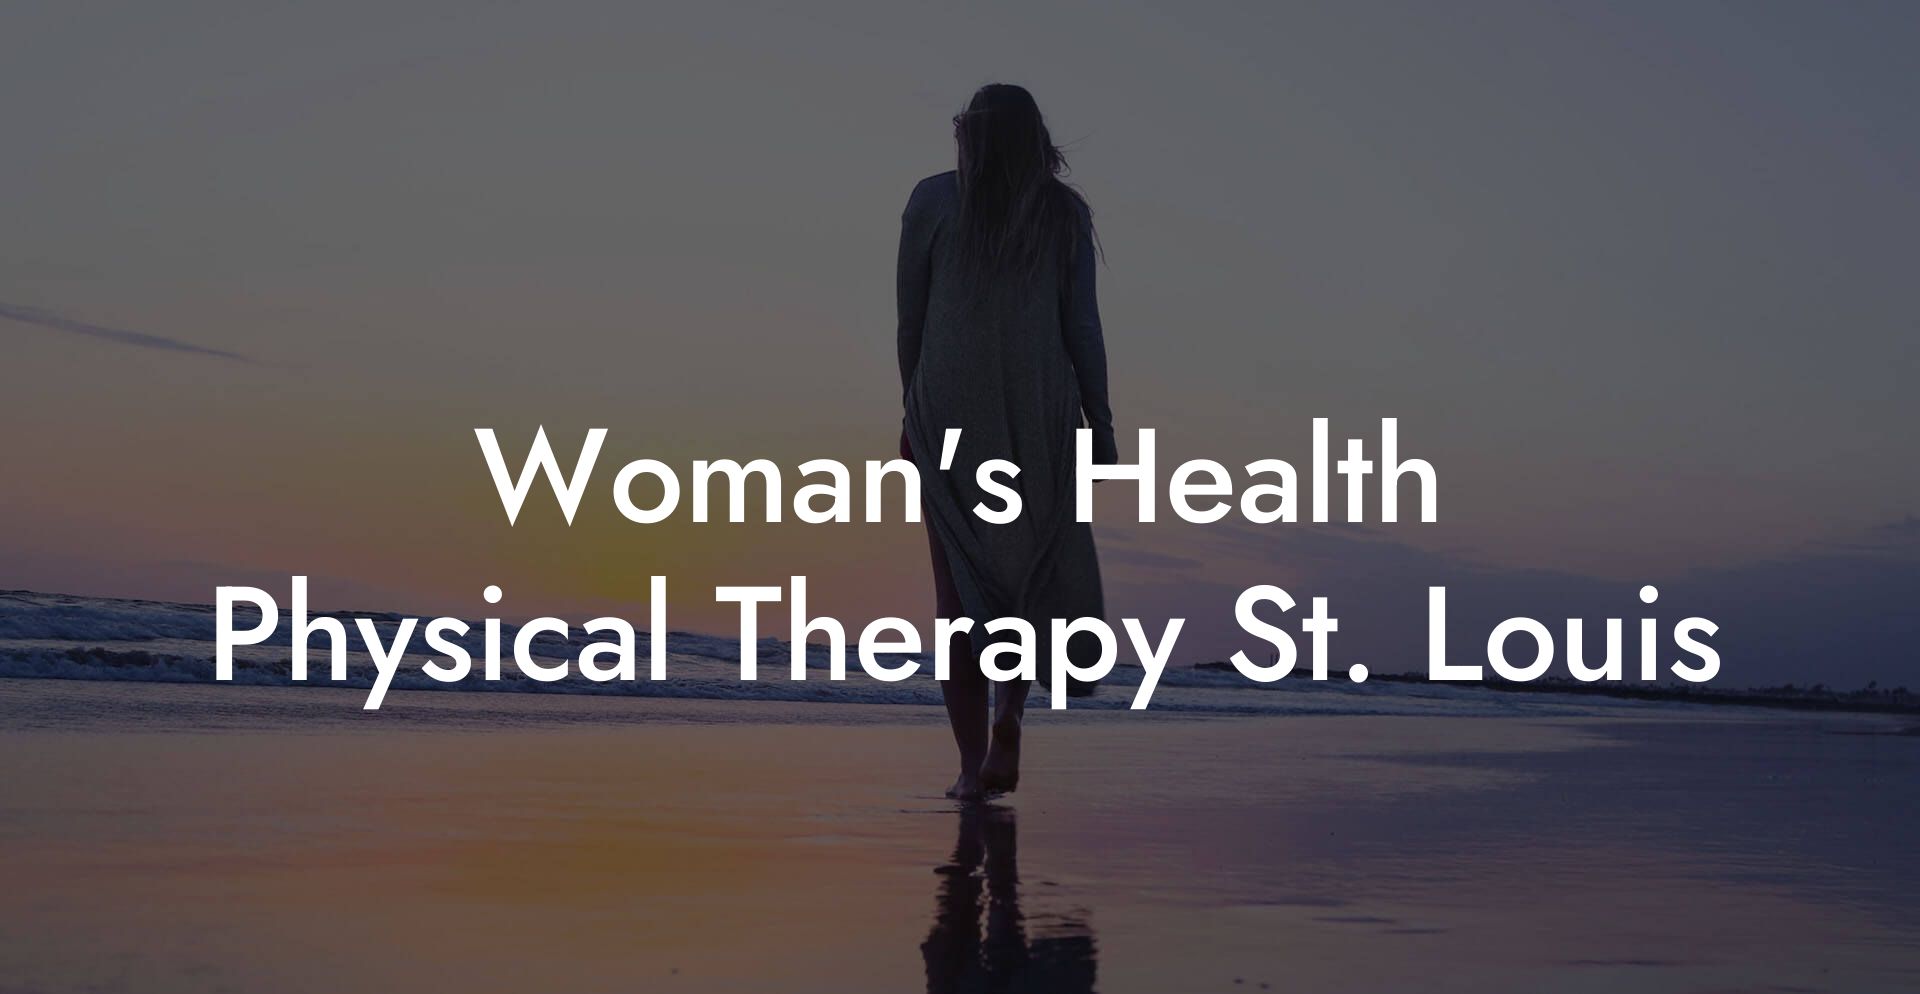 Woman's Health Physical Therapy St. Louis